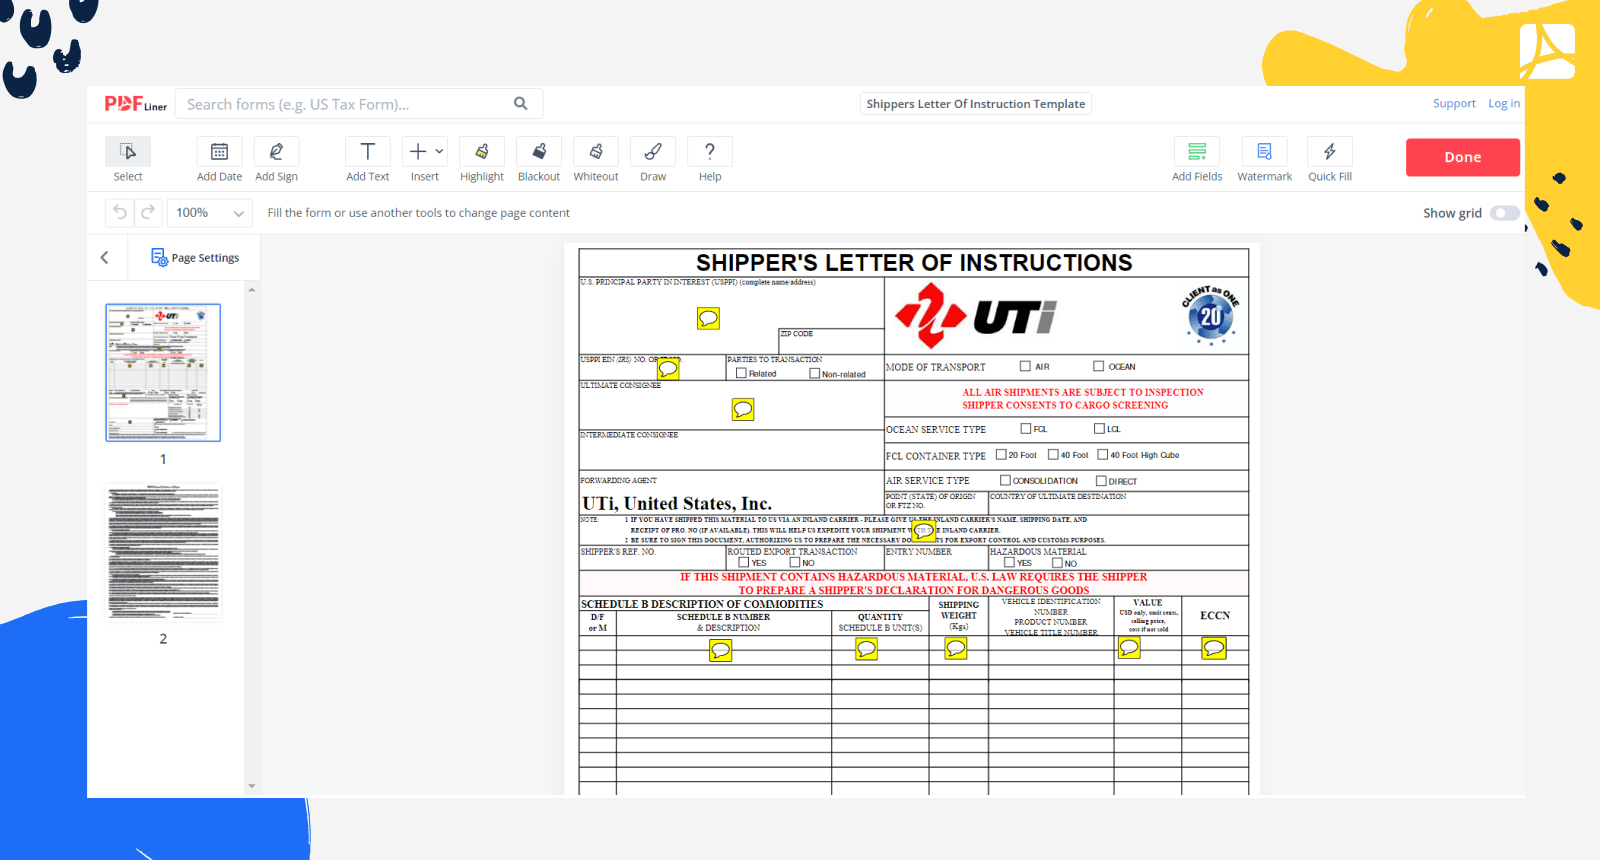 Shippers Letter Of Instruction Template Form Screenshot